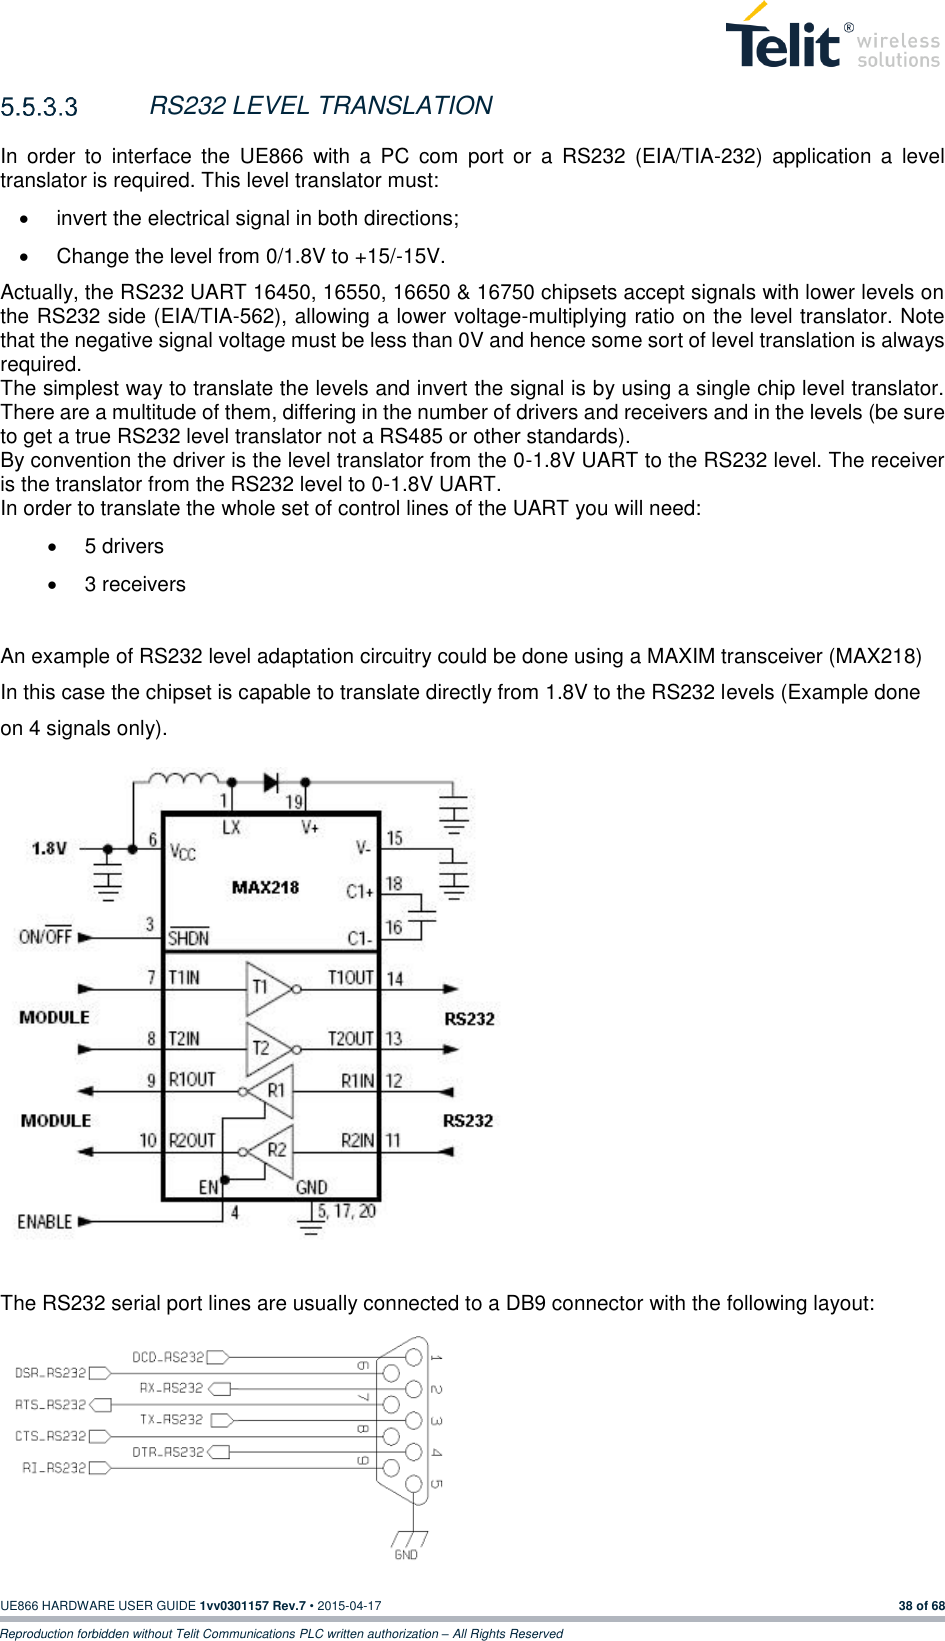  UE866 HARDWARE USER GUIDE 1vv0301157 Rev.7 • 2015-04-17 38 of 68 Reproduction forbidden without Telit Communications PLC written authorization – All Rights Reserved   RS232 LEVEL TRANSLATION  In  order  to  interface  the  UE866  with  a  PC  com  port  or  a  RS232  (EIA/TIA-232)  application  a  level translator is required. This level translator must:   invert the electrical signal in both directions;   Change the level from 0/1.8V to +15/-15V. Actually, the RS232 UART 16450, 16550, 16650 &amp; 16750 chipsets accept signals with lower levels on the RS232 side (EIA/TIA-562), allowing a lower voltage-multiplying ratio on the level translator. Note that the negative signal voltage must be less than 0V and hence some sort of level translation is always required.  The simplest way to translate the levels and invert the signal is by using a single chip level translator. There are a multitude of them, differing in the number of drivers and receivers and in the levels (be sure to get a true RS232 level translator not a RS485 or other standards). By convention the driver is the level translator from the 0-1.8V UART to the RS232 level. The receiver is the translator from the RS232 level to 0-1.8V UART. In order to translate the whole set of control lines of the UART you will need:   5 drivers   3 receivers  An example of RS232 level adaptation circuitry could be done using a MAXIM transceiver (MAX218)  In this case the chipset is capable to translate directly from 1.8V to the RS232 levels (Example done on 4 signals only).                The RS232 serial port lines are usually connected to a DB9 connector with the following layout:        